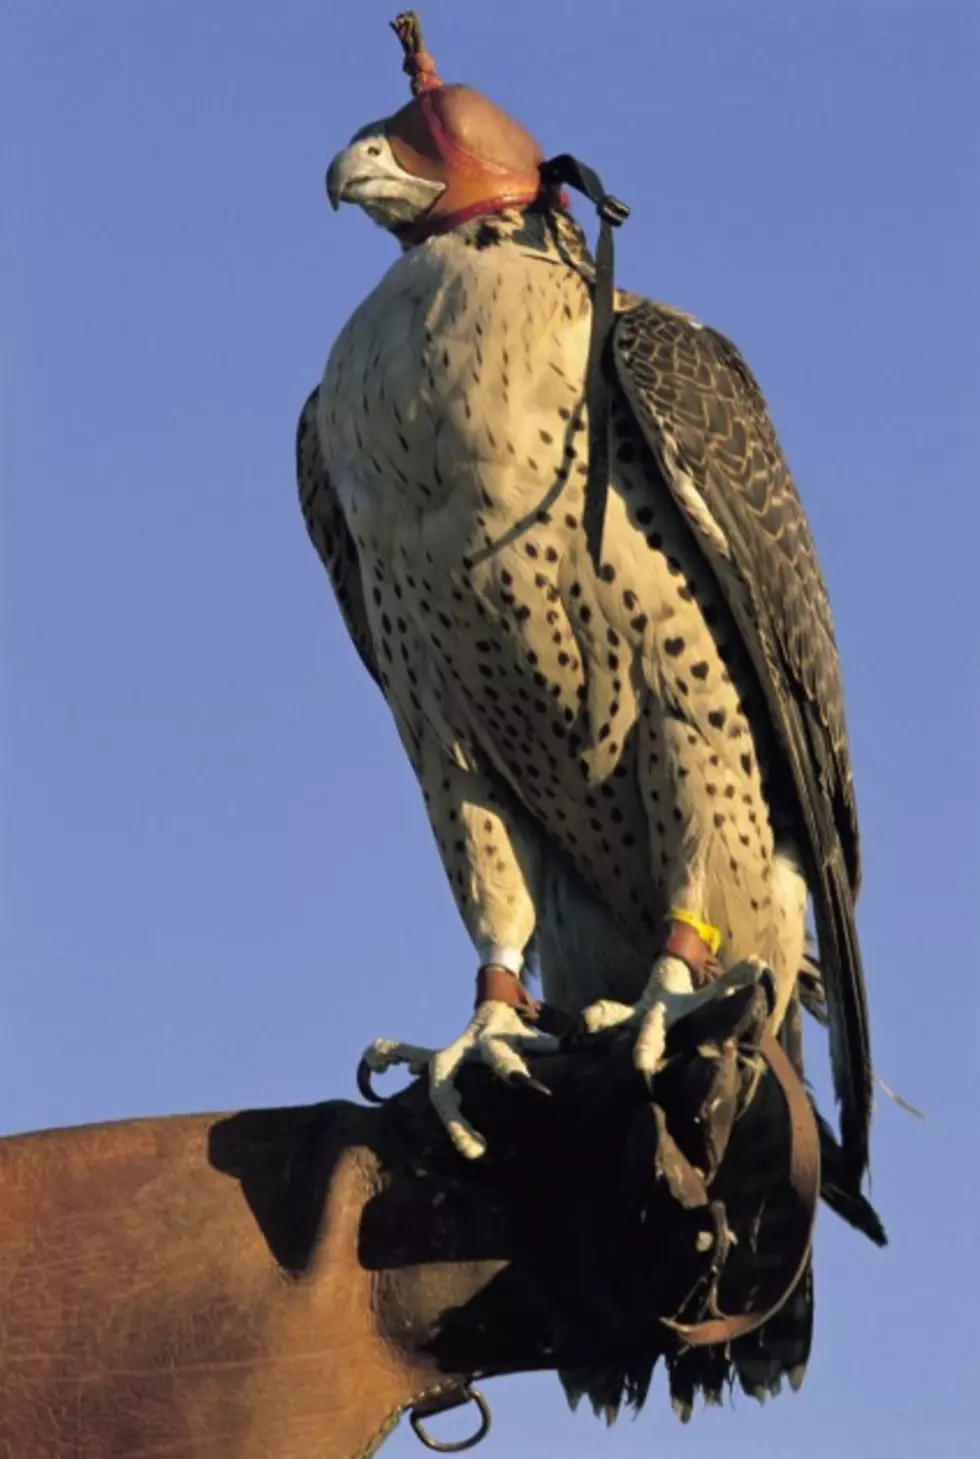 Wyoming Falconry Regulations Change In 2012